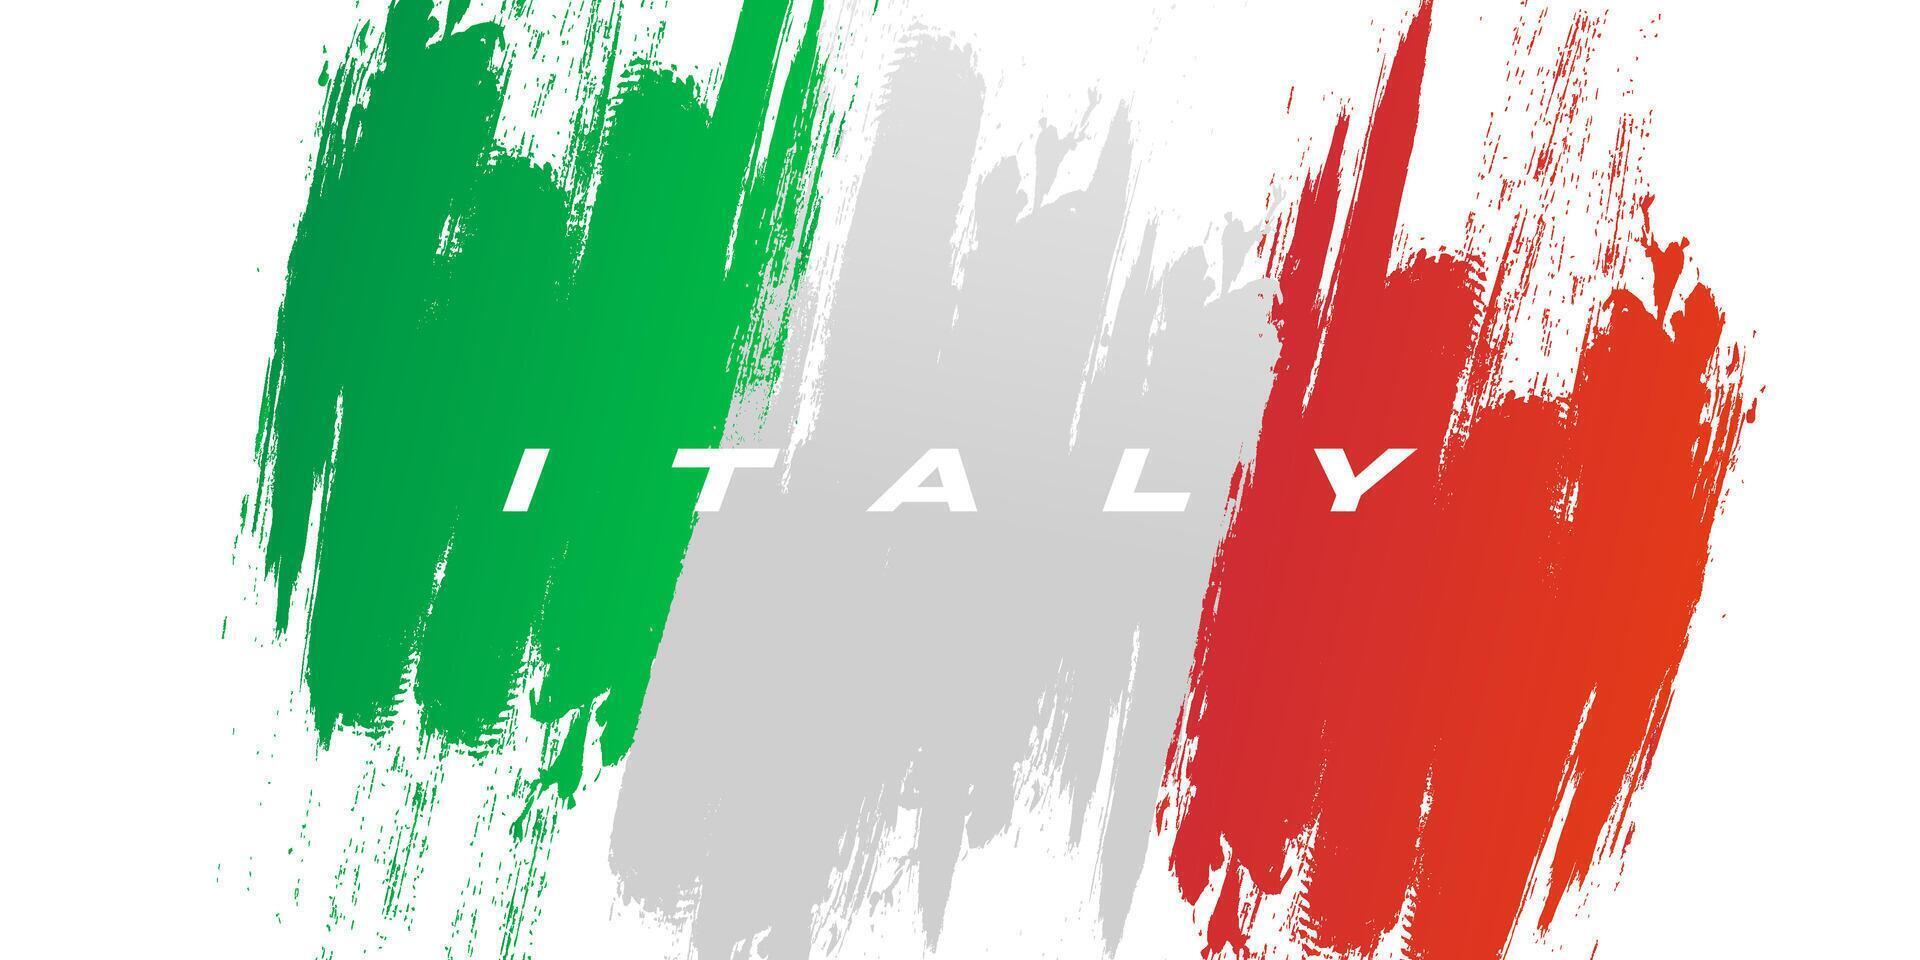 Italy Flag in Brush Paint Style. National Flag of Italy with Grunge Brush Concept vector